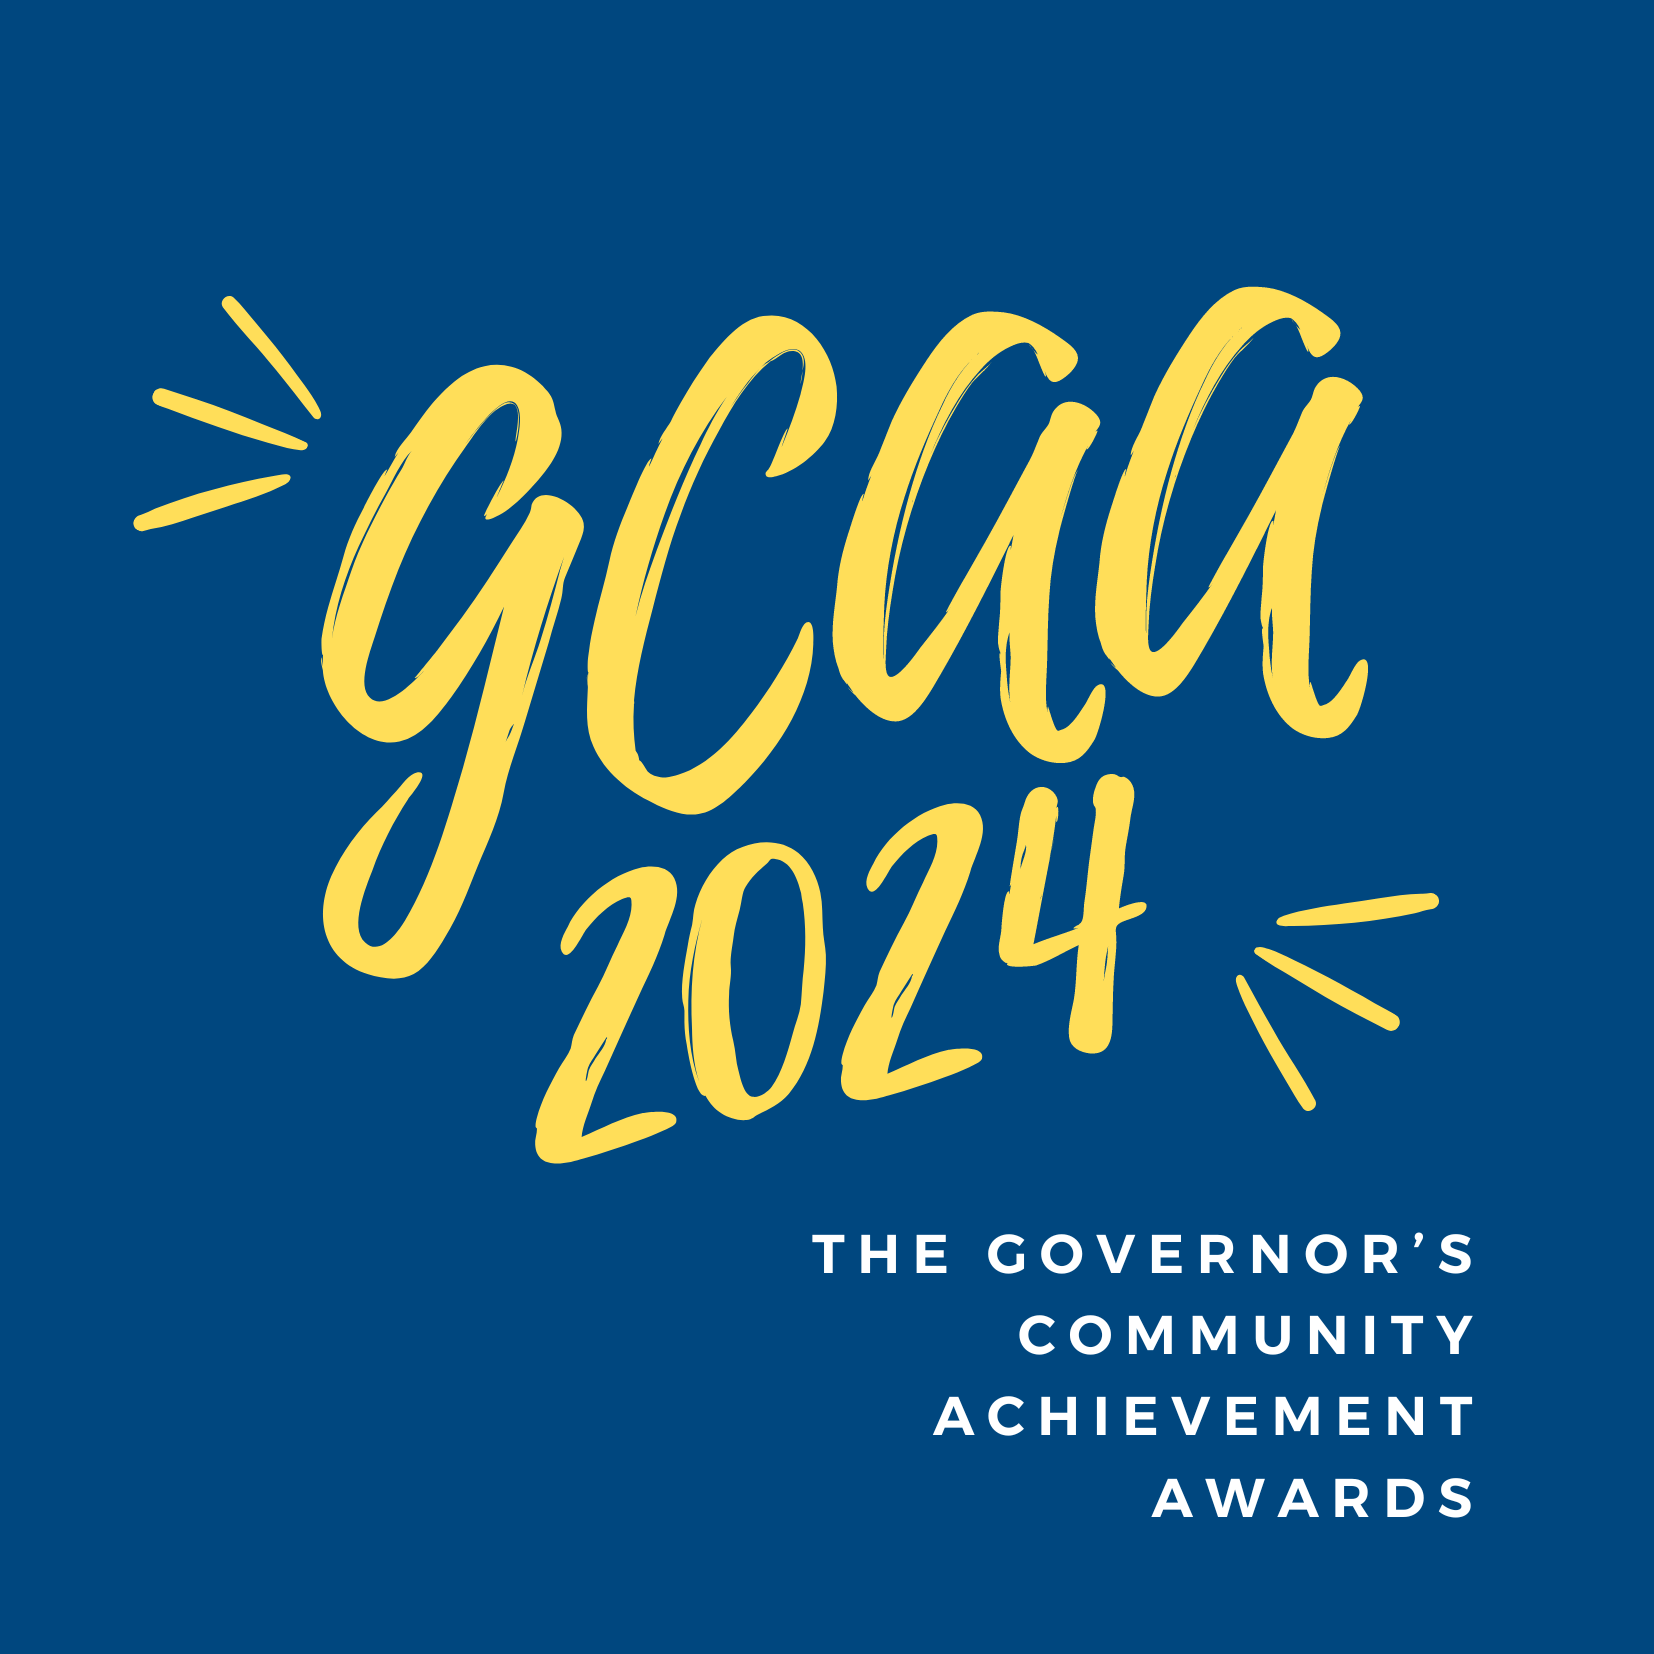 graphic image detailing Governor's Community Achievement Awards on blue background